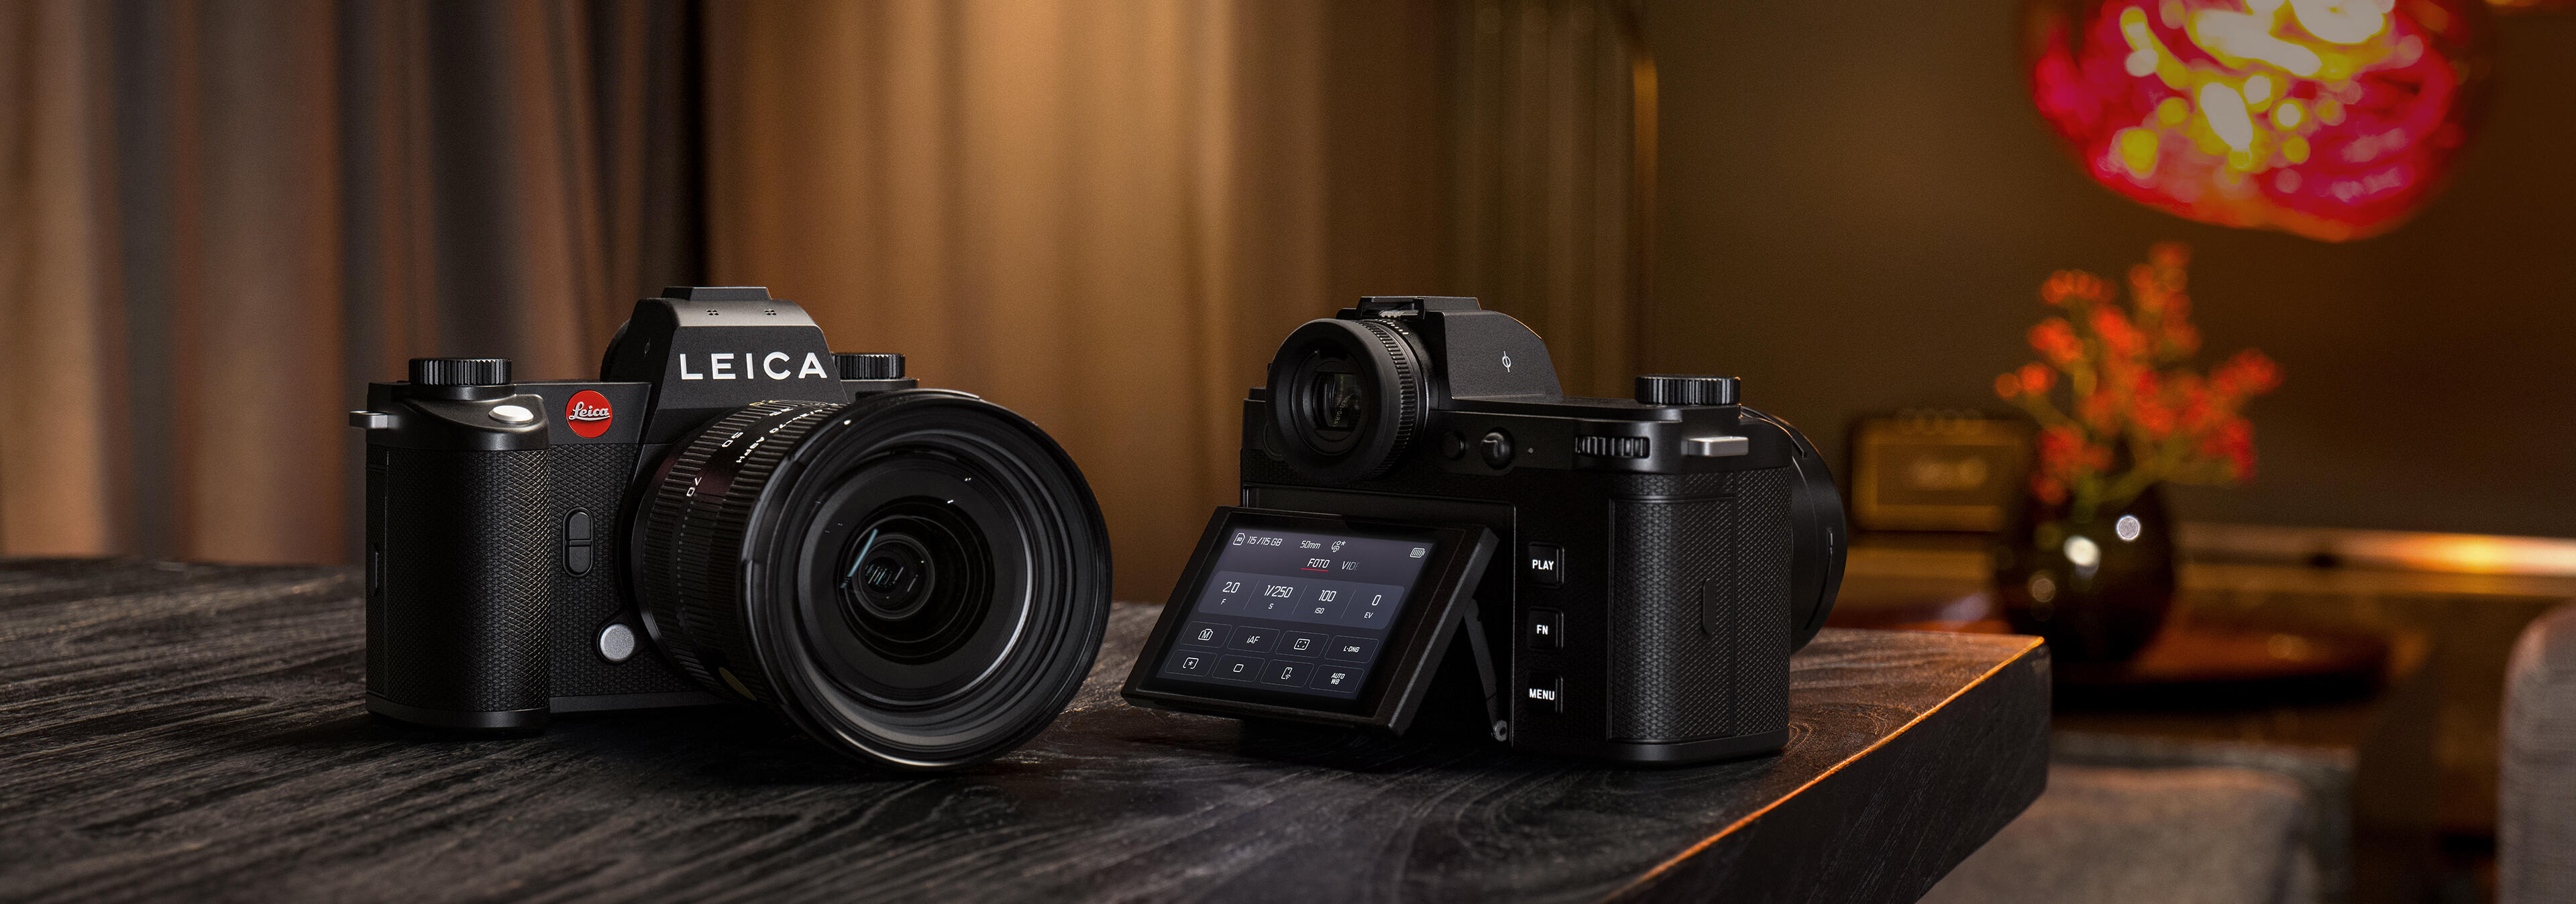 two Leica SL3 Camera, one front, one display